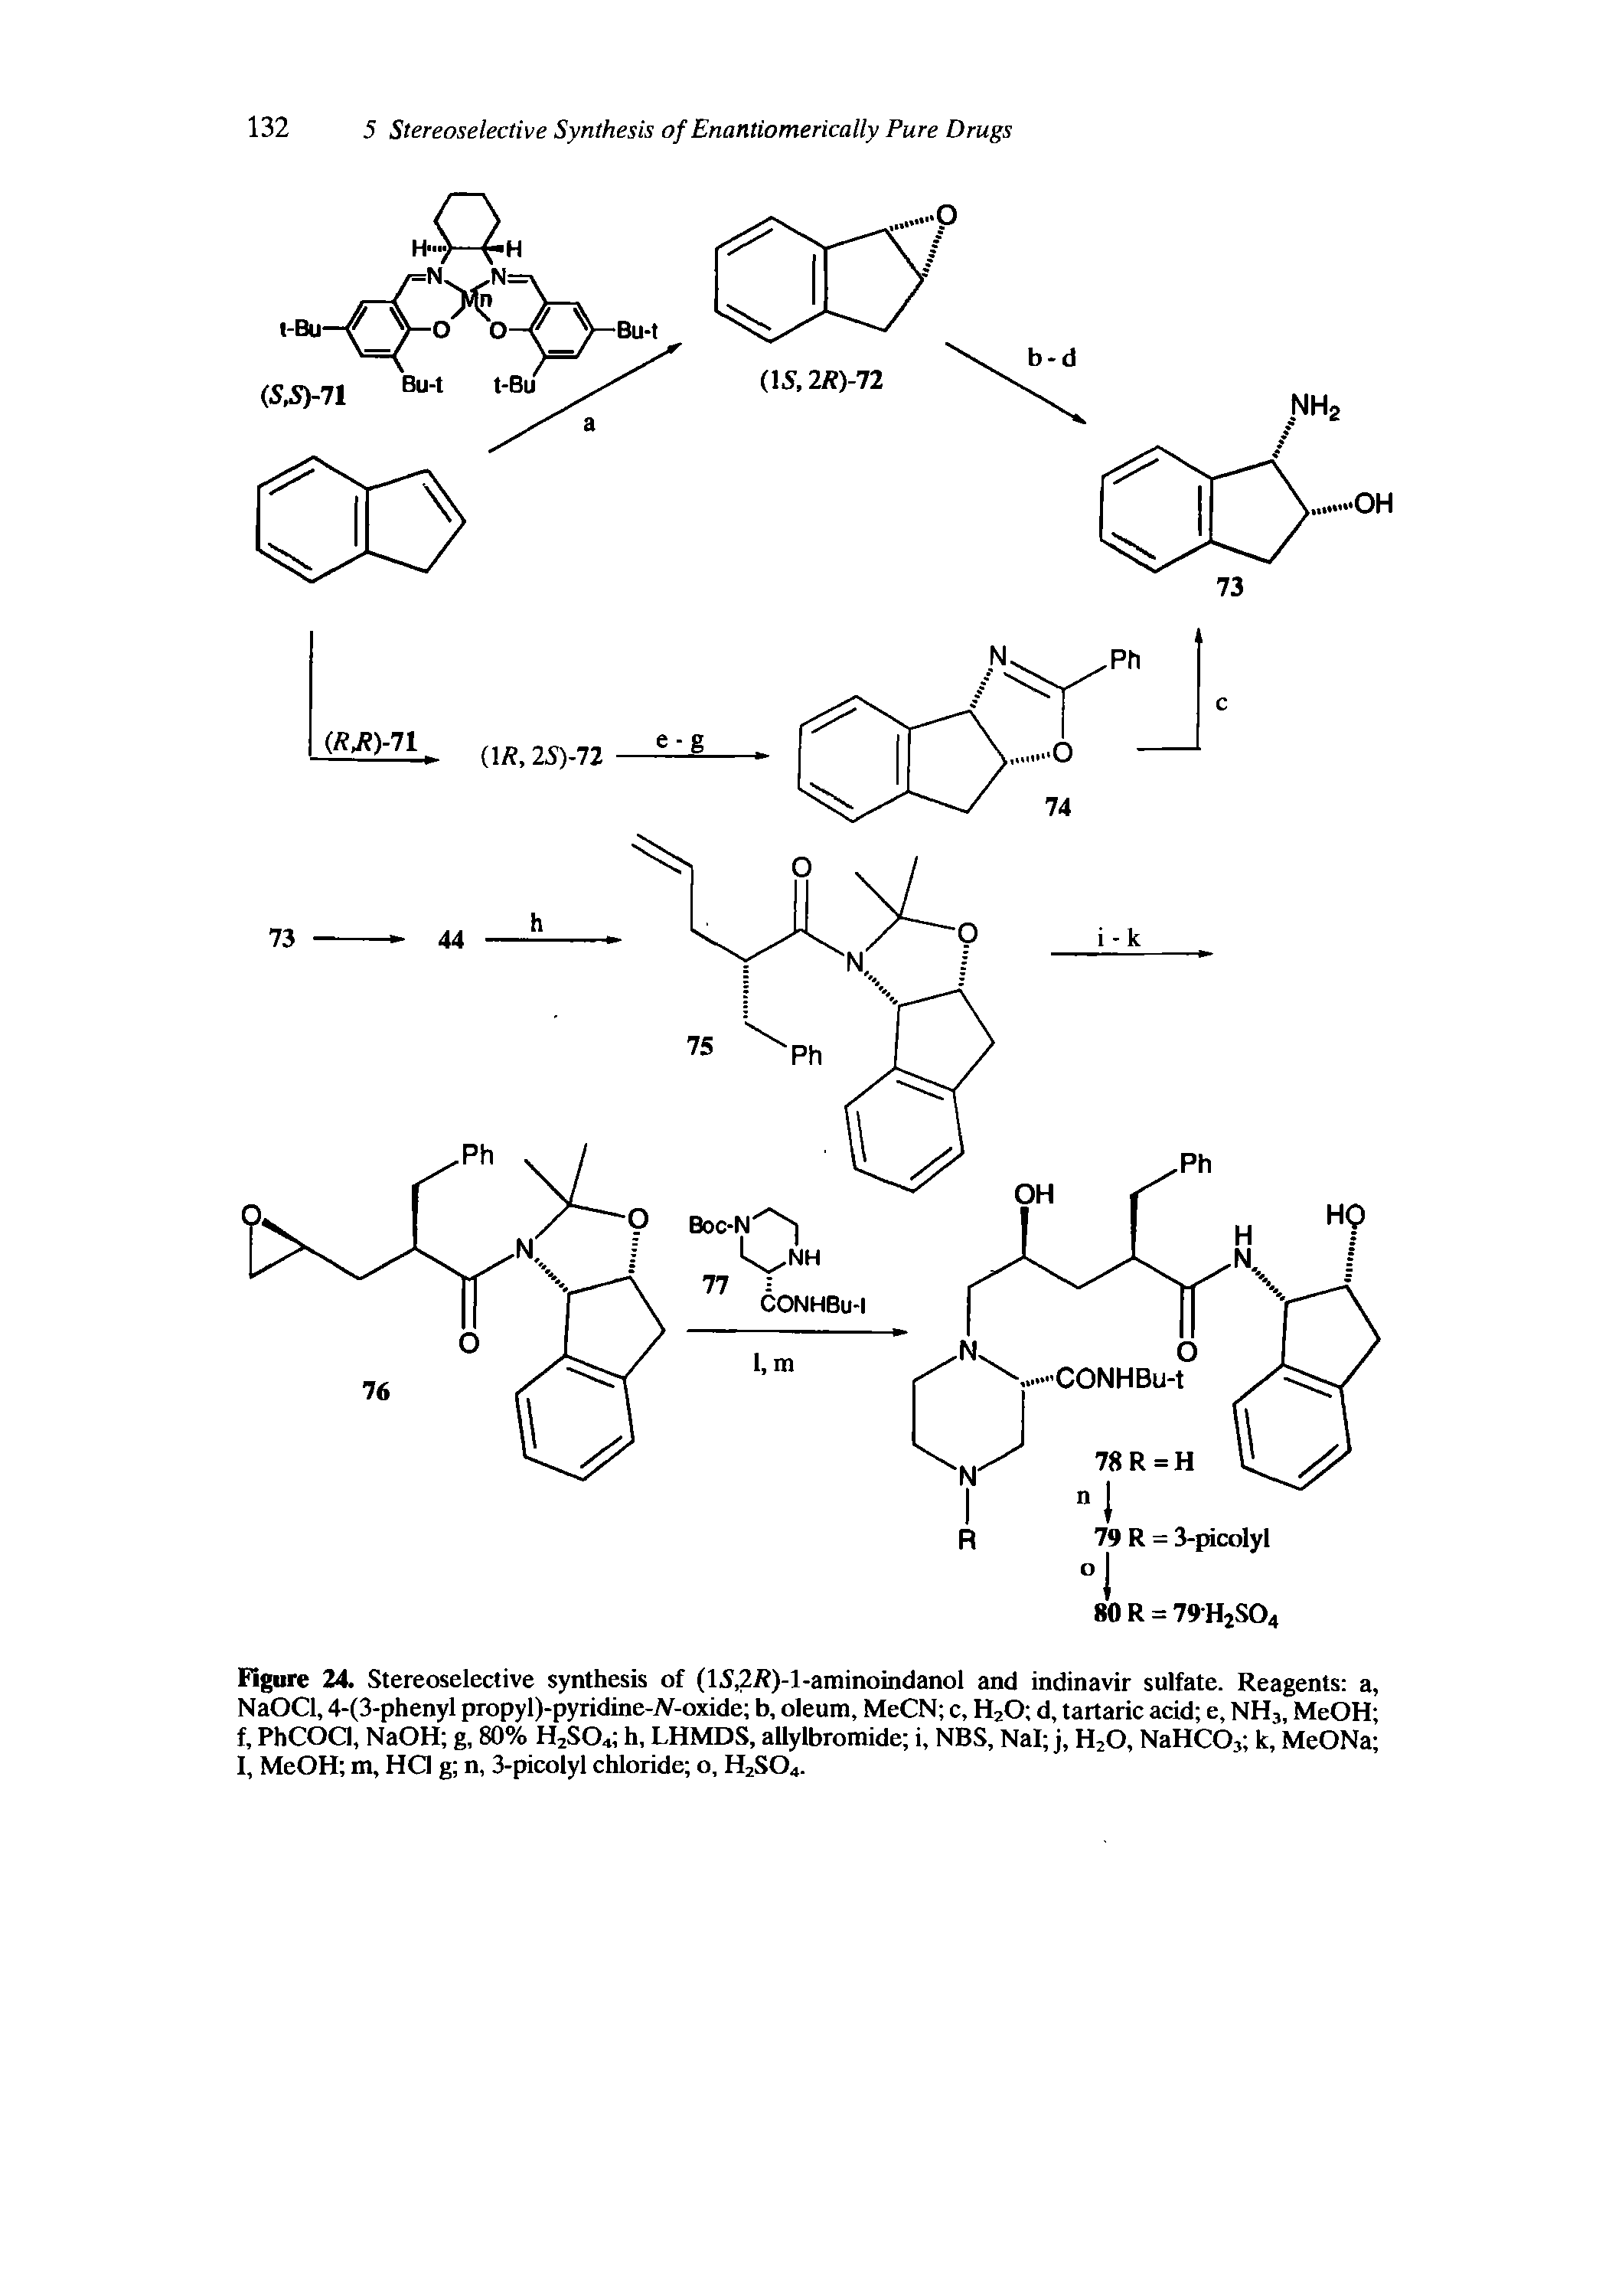 Figure 24. Stereoselective synthesis of (lS,2/ )-l-aminoindanol and indinavir sulfate. Reagents a, NaOCl, 4-(3-phenyl propyl)-pyridinc-/V-oxidc b, oleum, MeCN c, H20 d, tartaric acid e, NH3, MeOH f, PhCOCl, NaOH g, 80% H2S04 h, LHMDS, allylbromide i, NBS, Nal j, H20, NaHCO, k, MeONa I, MeOH m, HQ g n, 3-picolyl chloride o, H2S04.